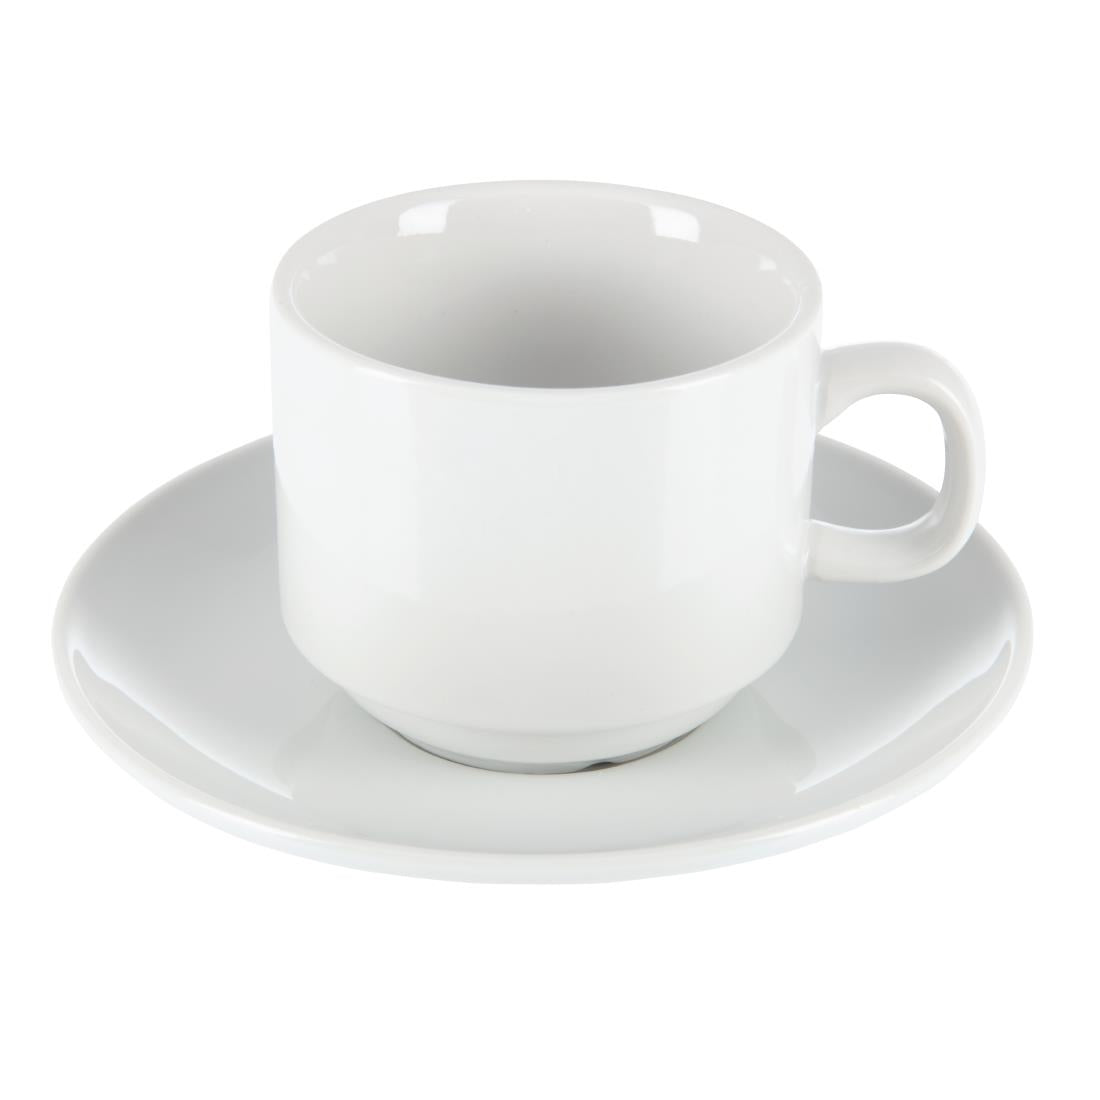 CB467 Olympia Whiteware Stacking Tea Cups 7oz 200ml (Pack of 12)